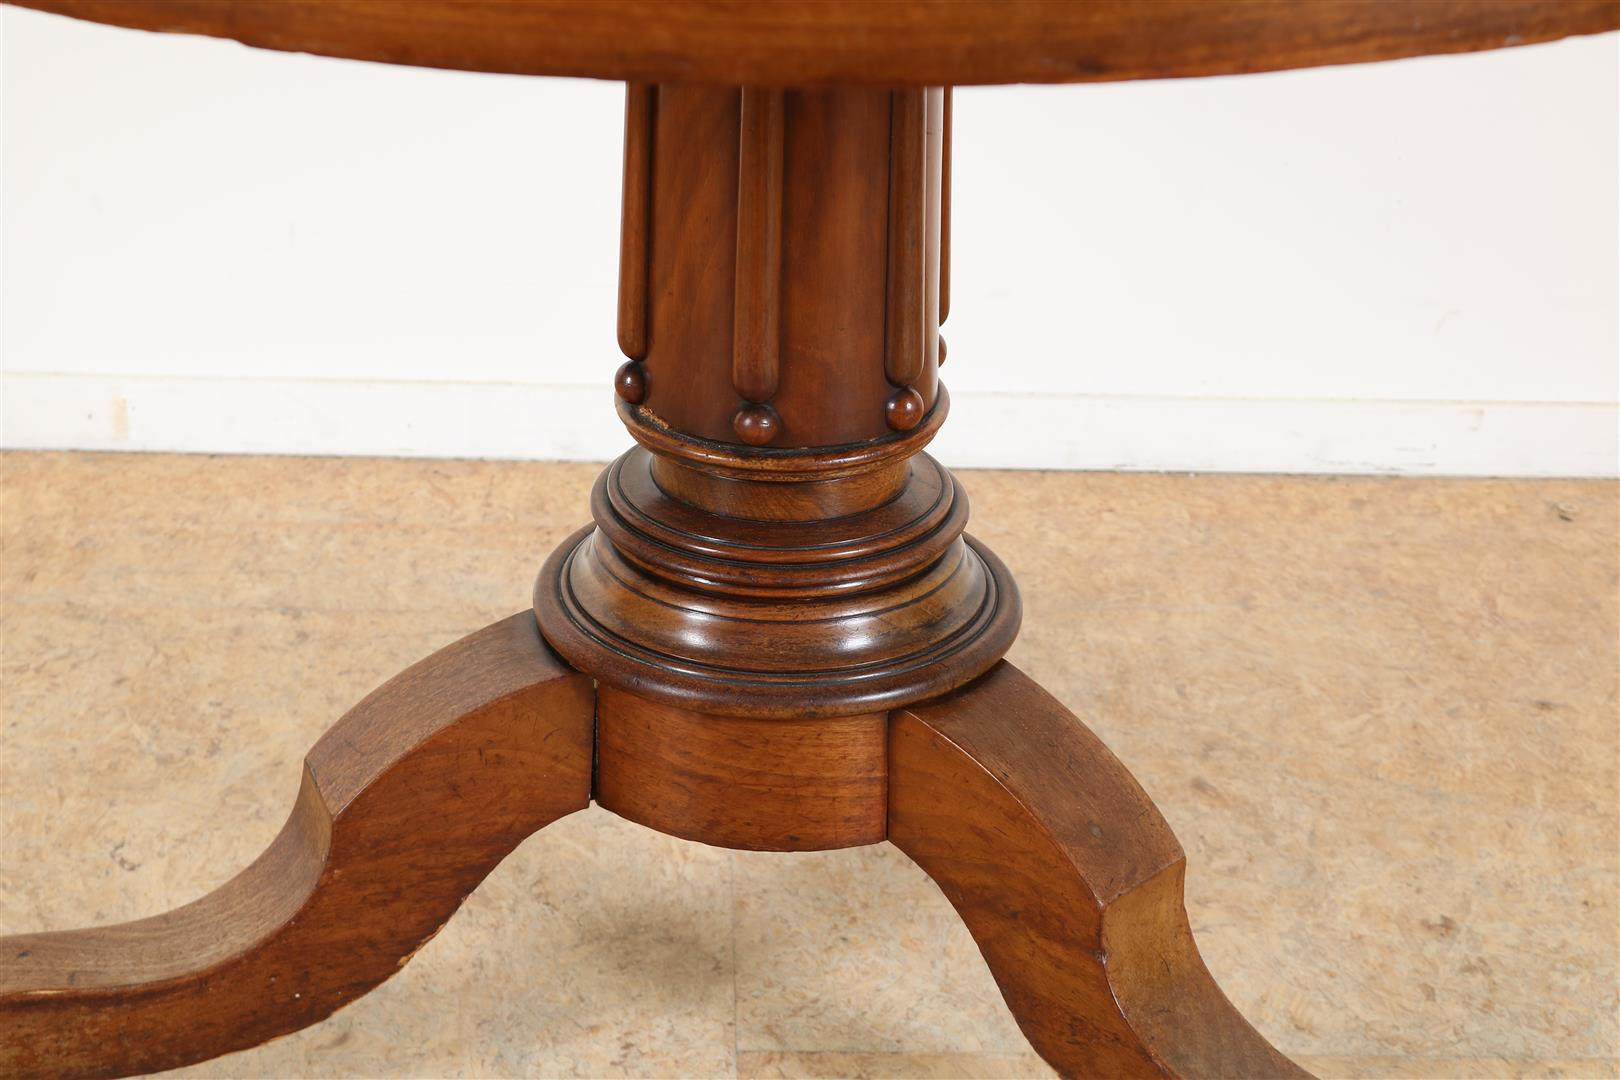 Mahogany Biedermeier round table on column leg ending in 3 branches, 19th century, 76 x 107 cm. - Image 3 of 3